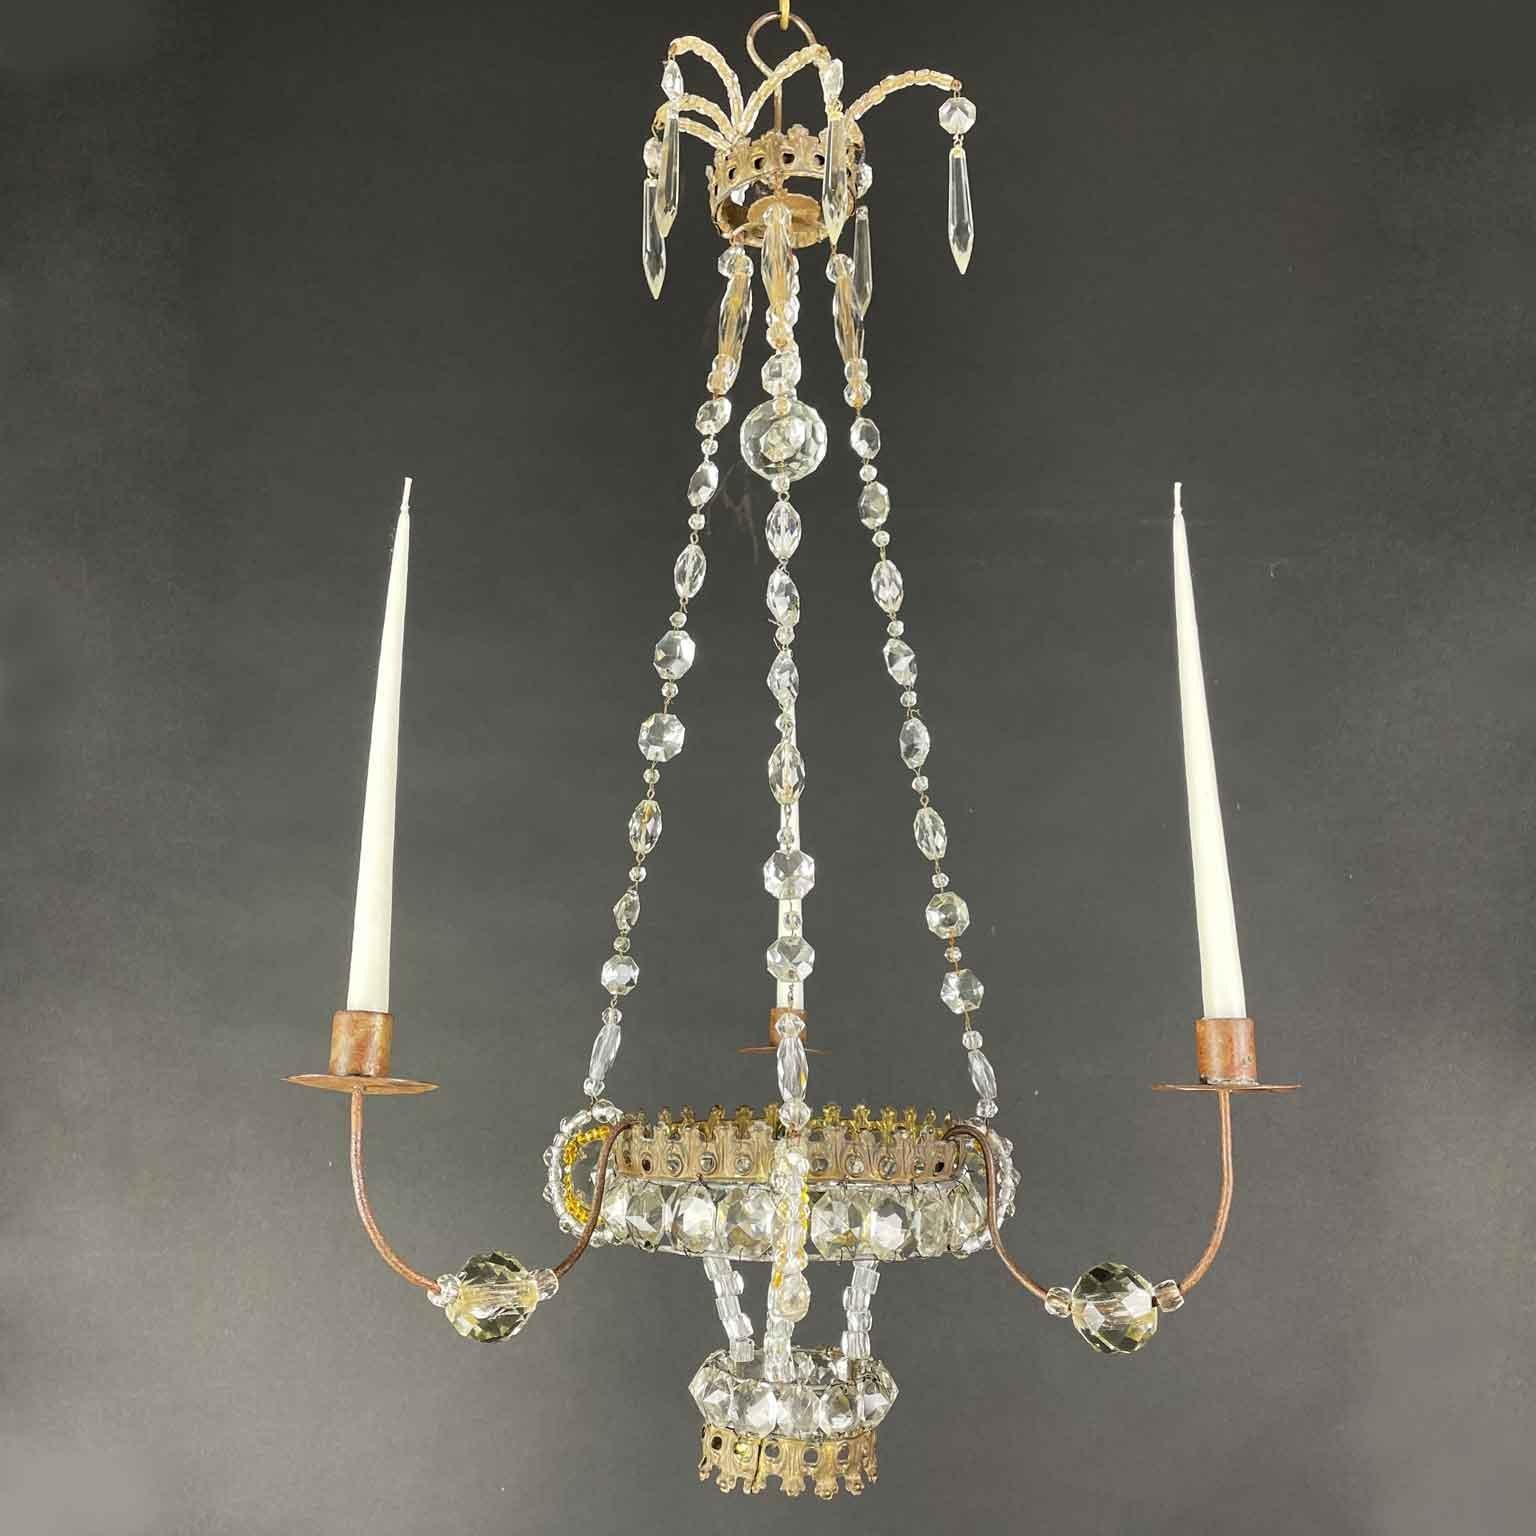 A charming classical Empire Italian chandelier born for candle lighting, featuring three arms ending with candles, no electric wiring, can be used as candle holders or decorative candelabra.
From Marche, a region in Central Italy, a romantic fully